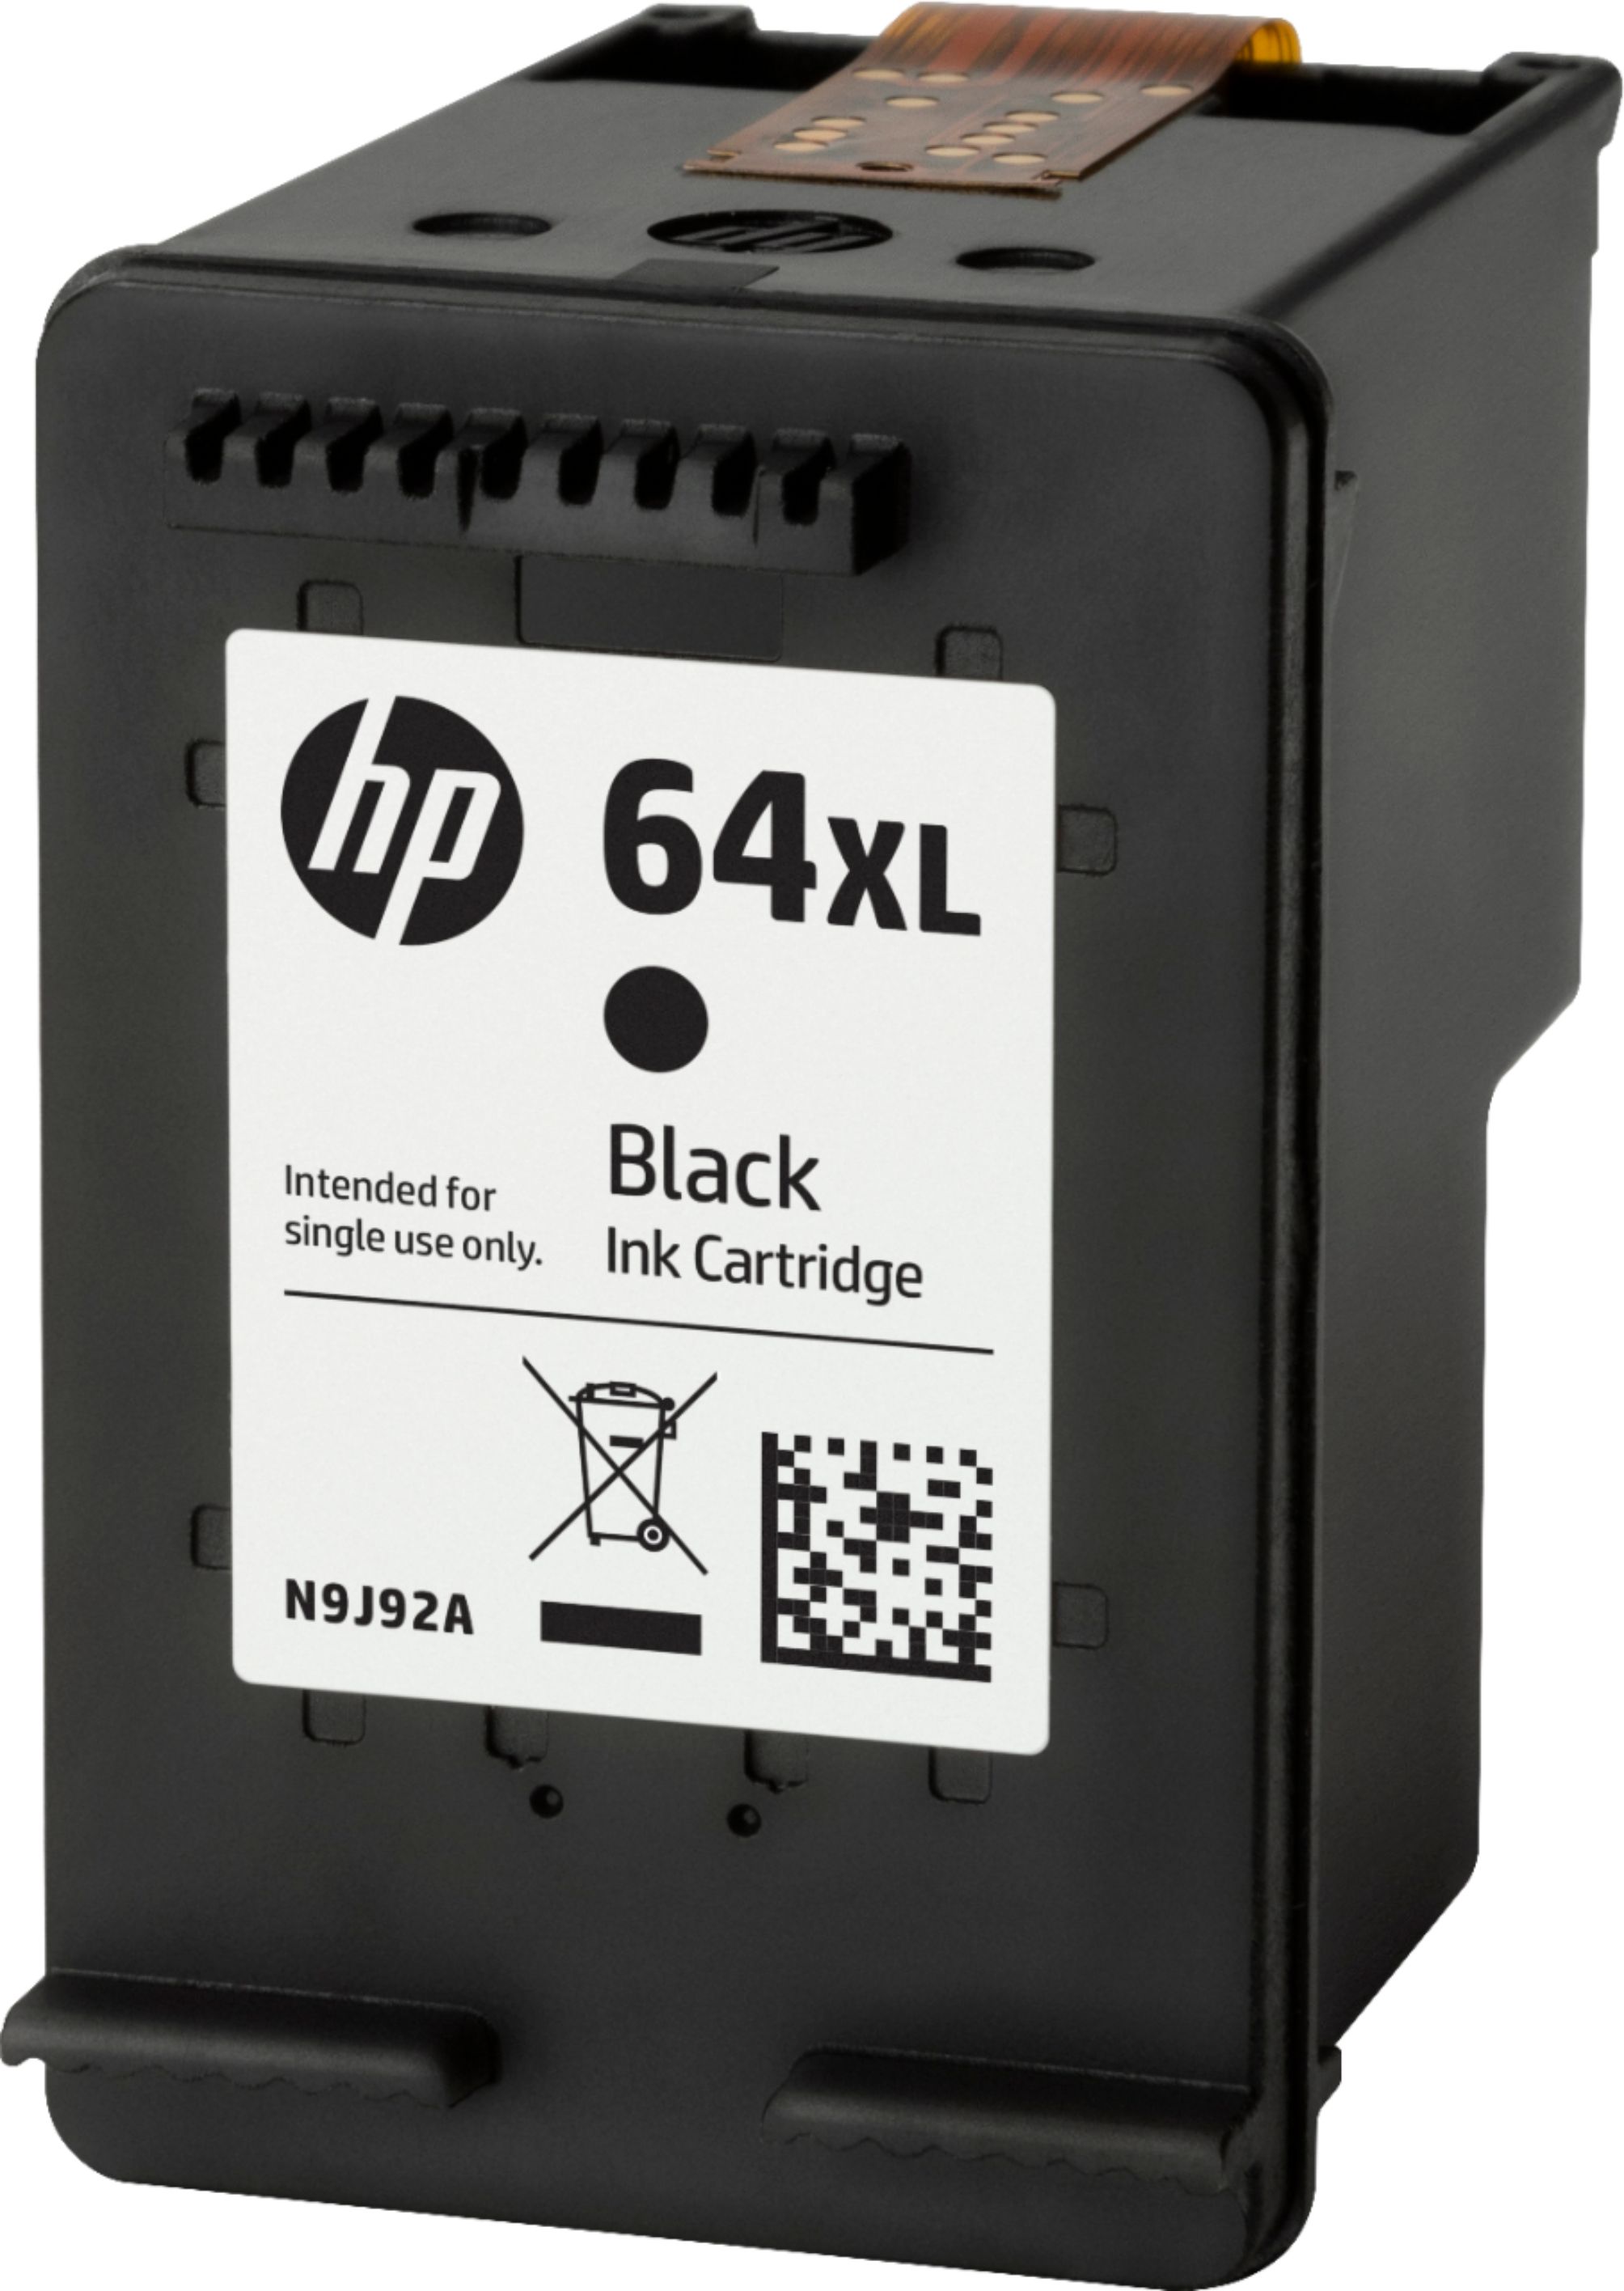 Order HP 303XL ink cartridges for the best value